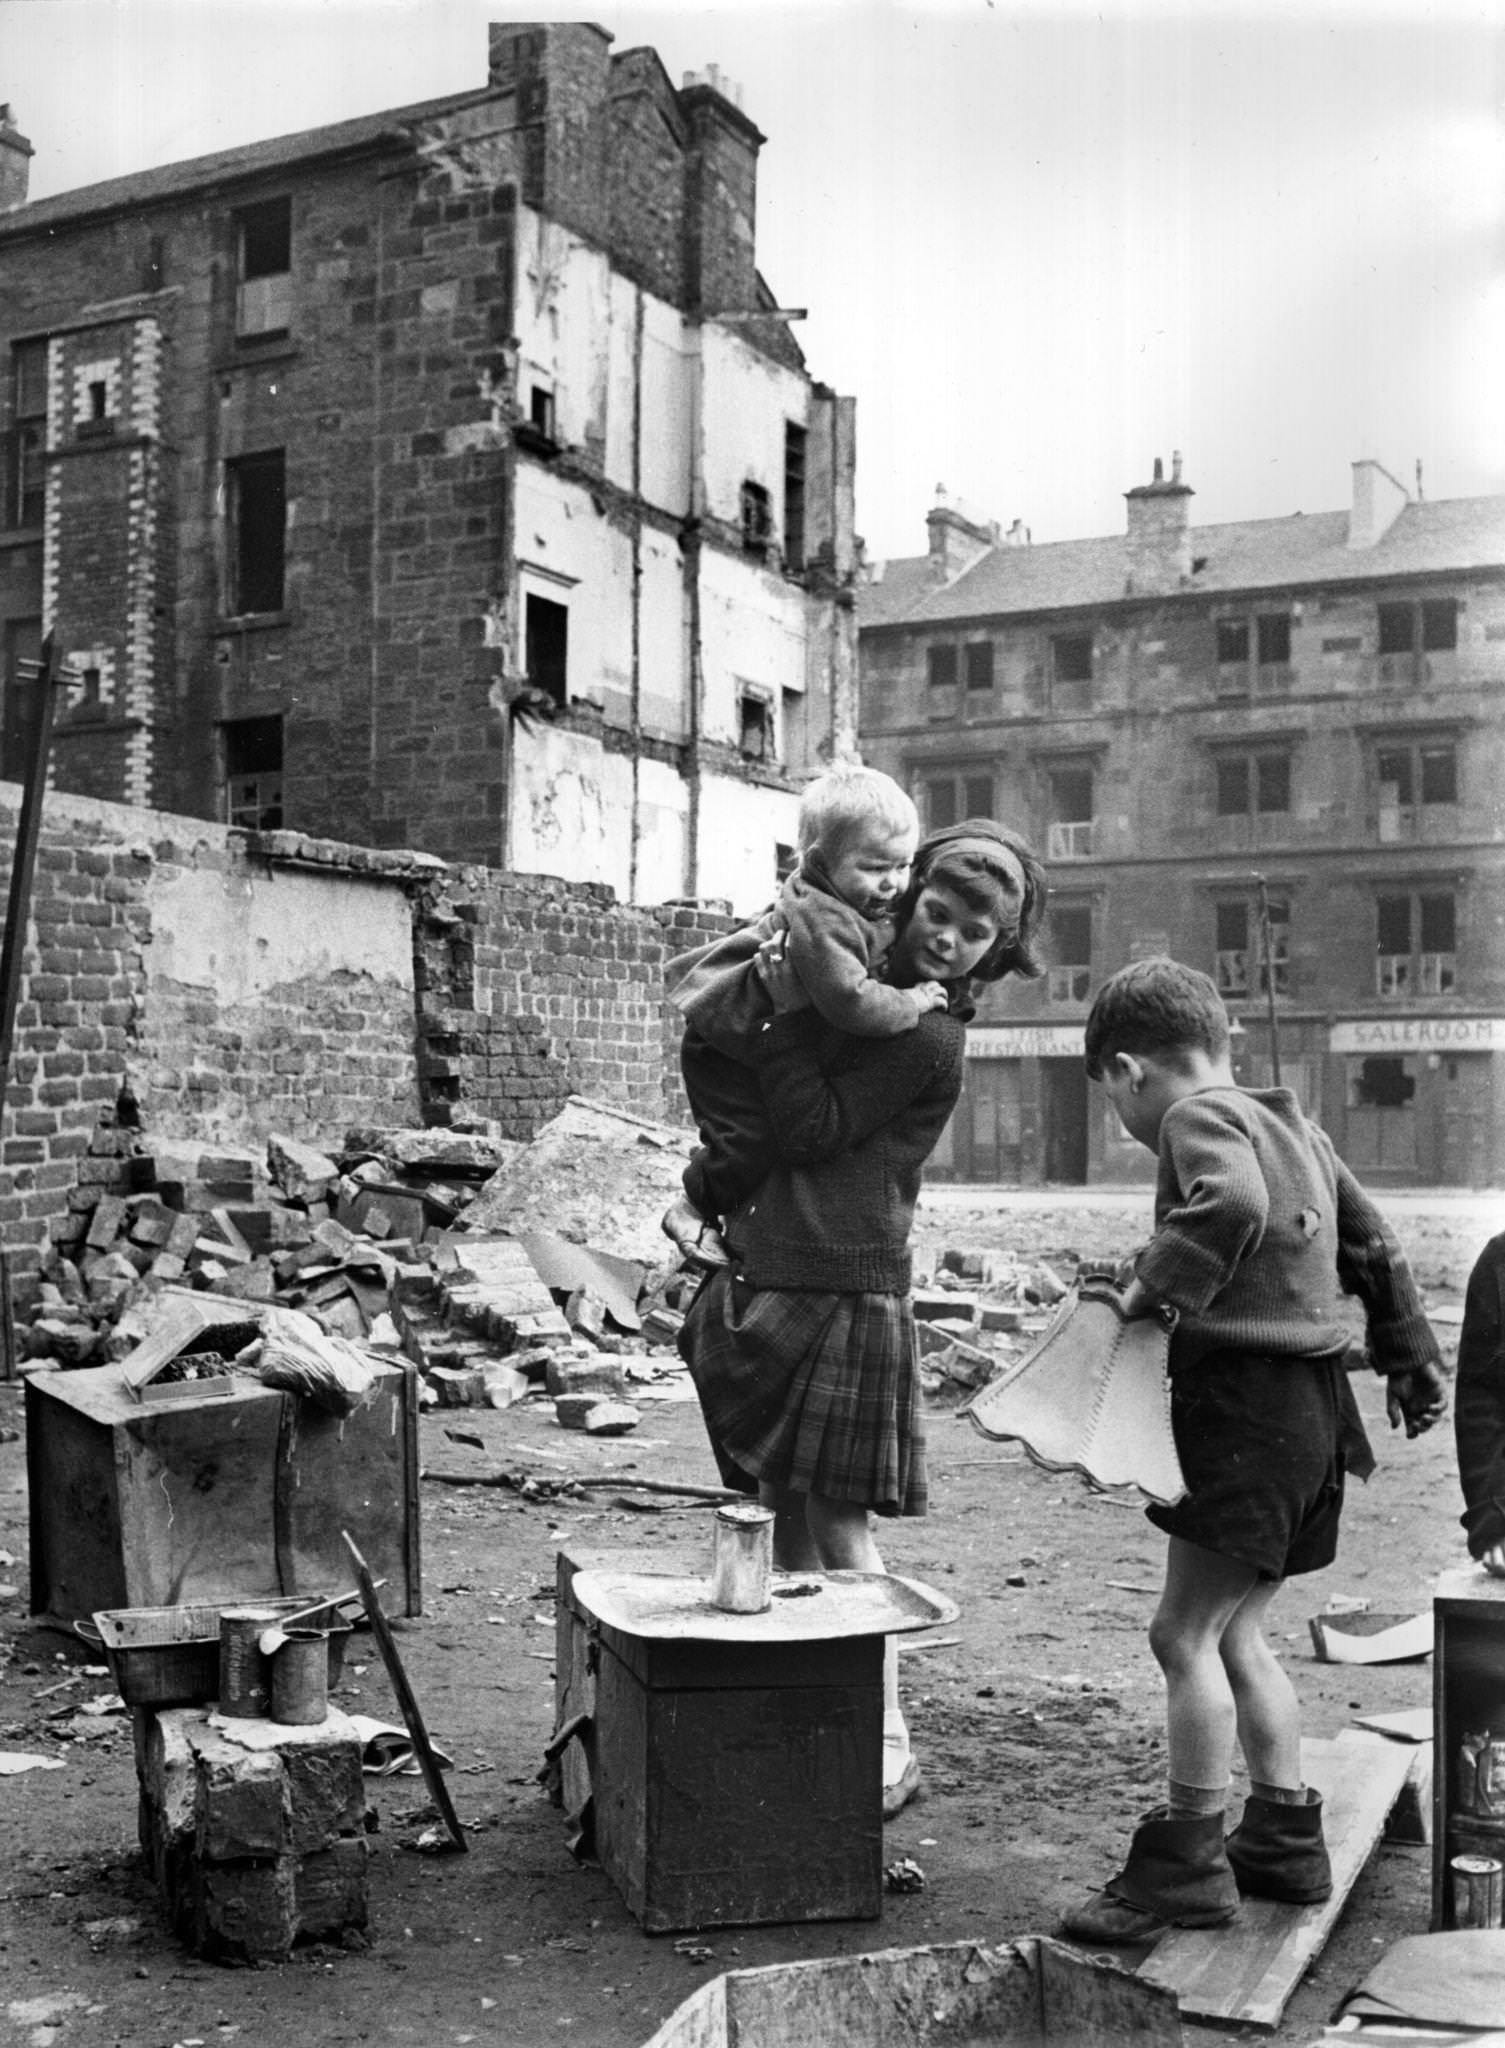 Children playing in an area of slums under clearance in the Gorbals area of Glasgow, 1960